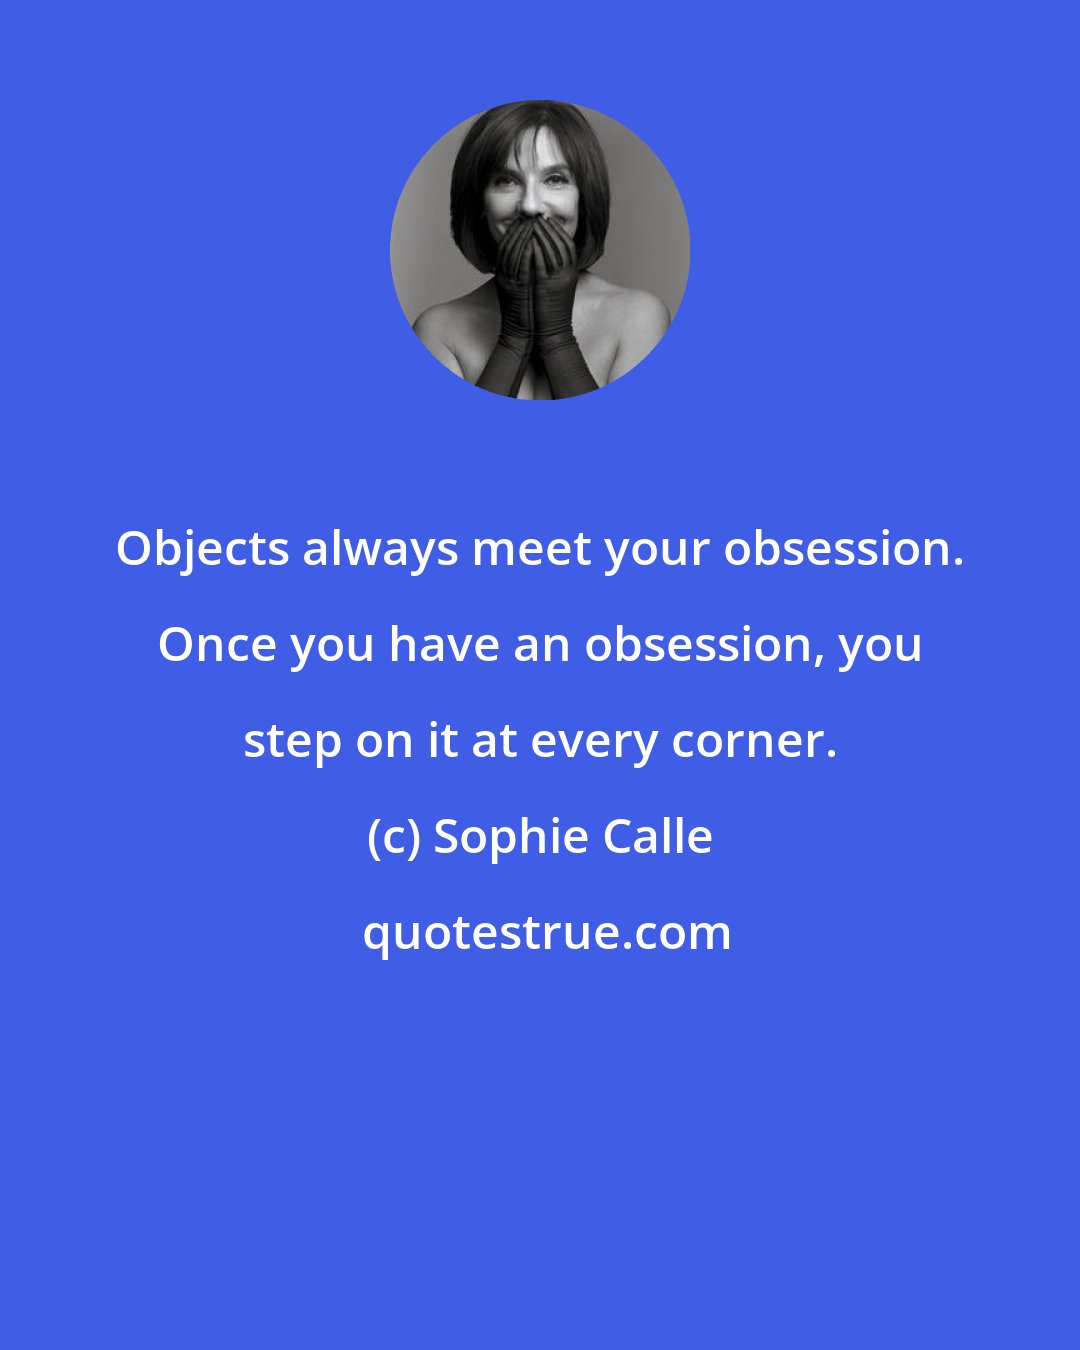 Sophie Calle: Objects always meet your obsession. Once you have an obsession, you step on it at every corner.